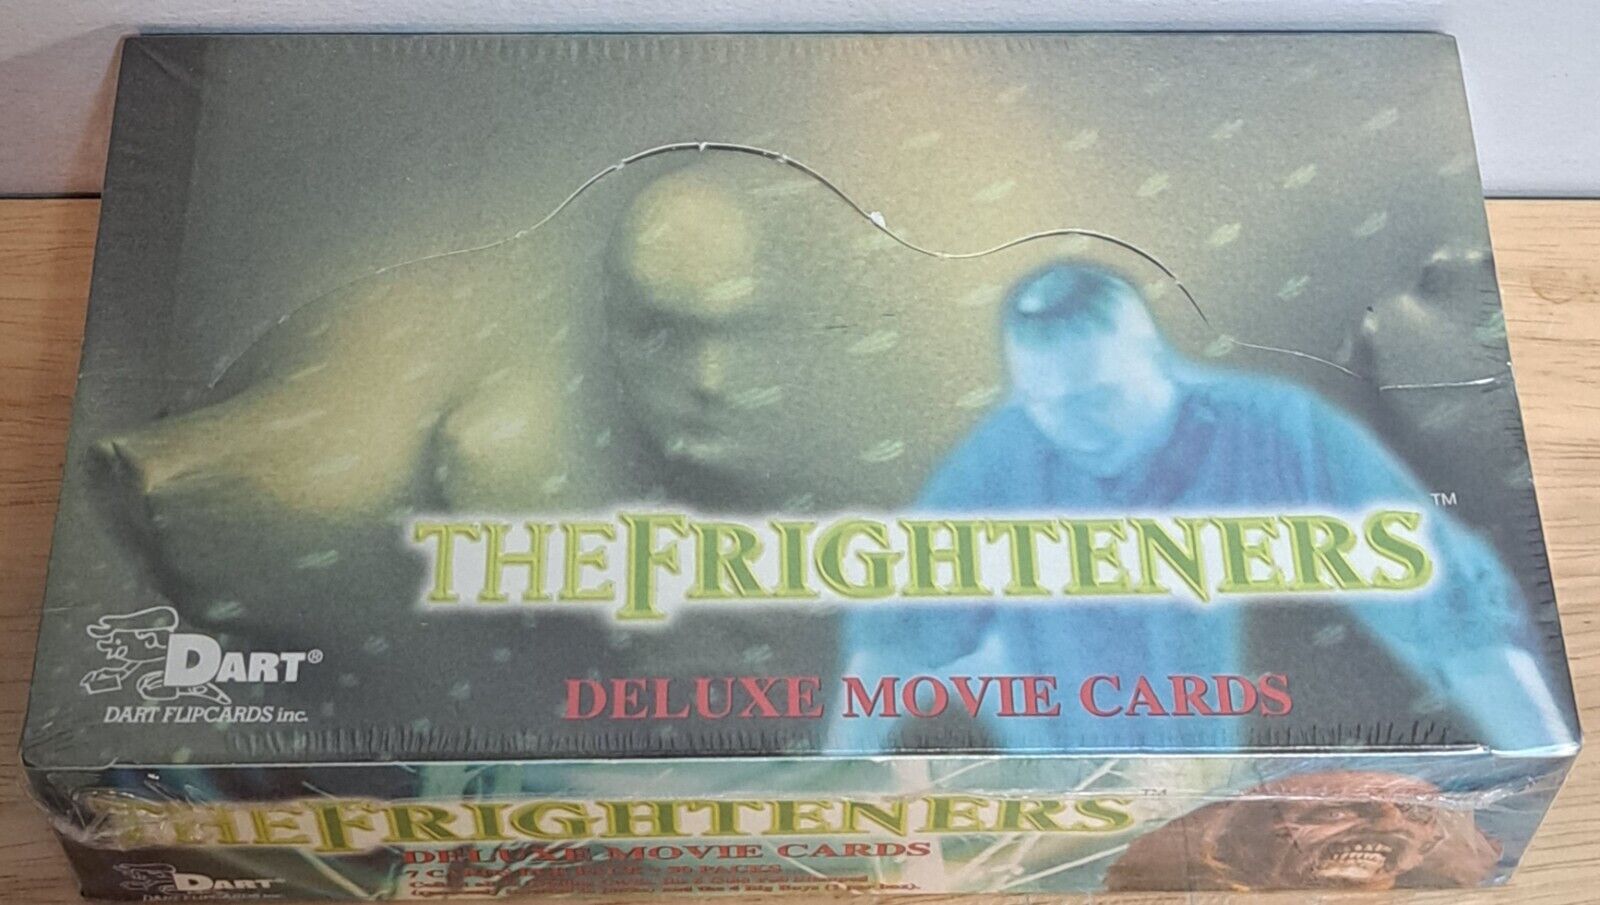 1996 DART FLIPCARDS THE FRIGHTENERS TRADING CARD BOX FACTORY SEALED